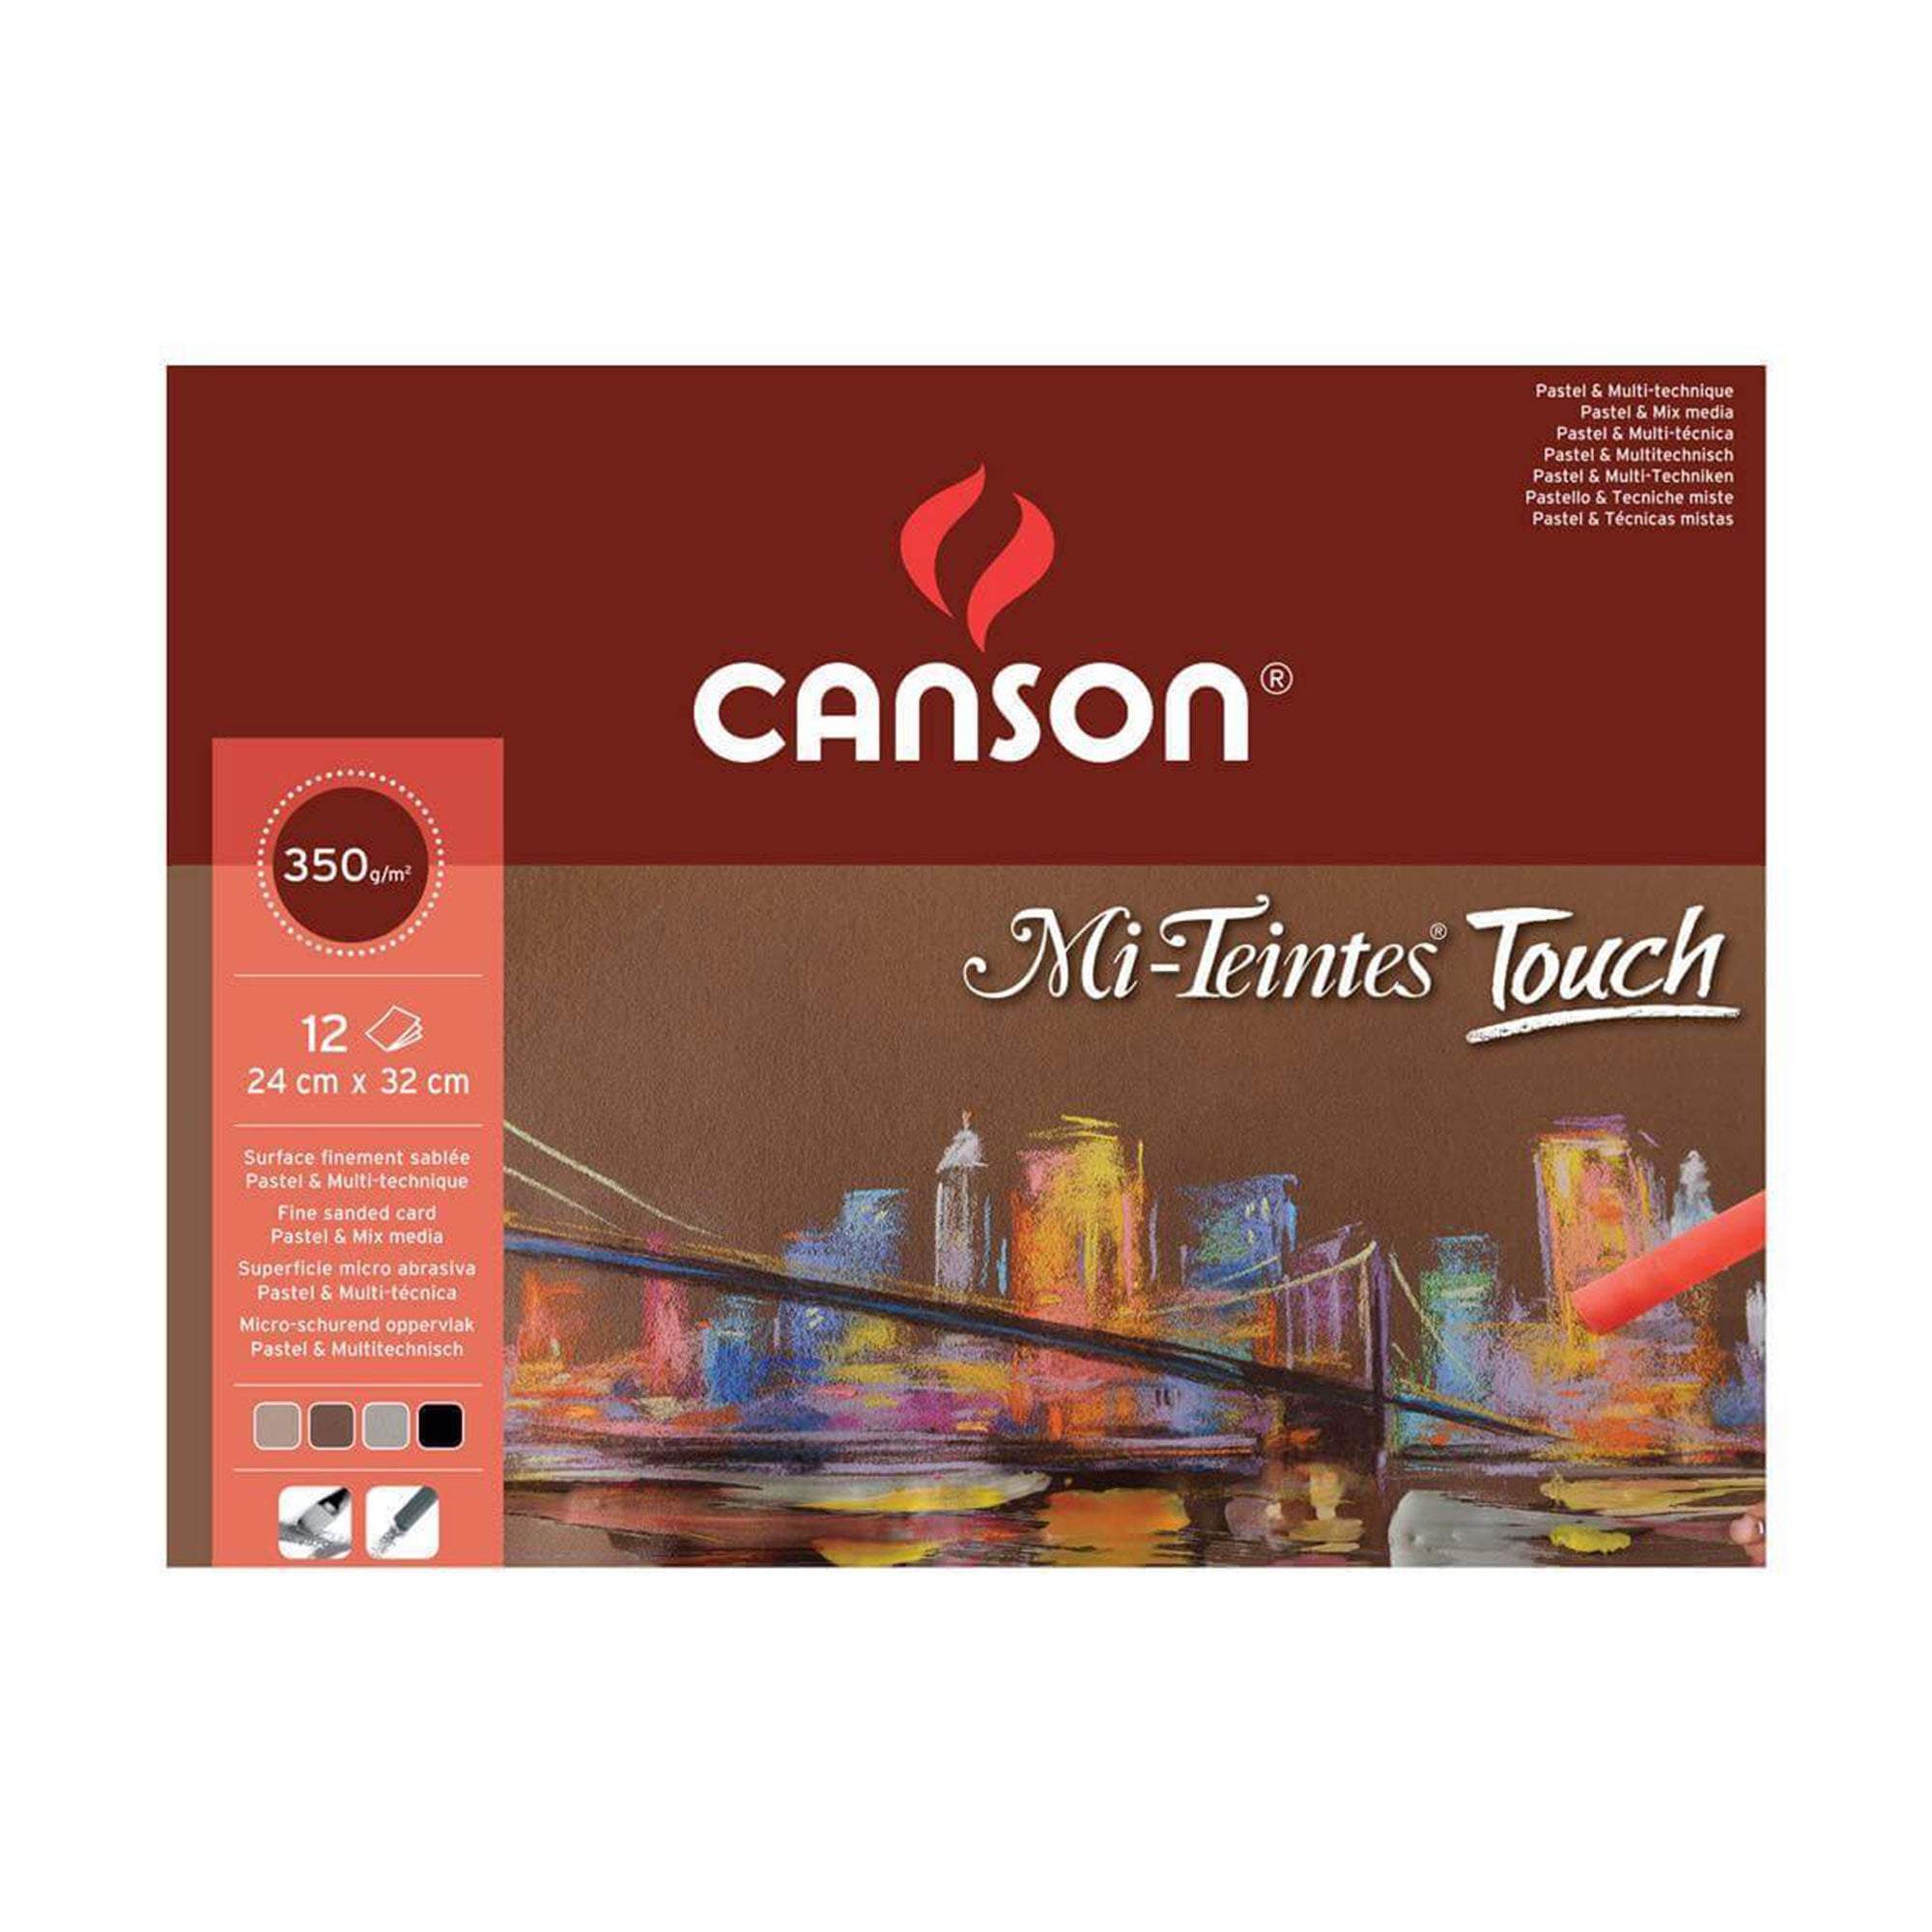 Canson Mi-Teintes Touch Pastel Pads - 350gsm 12 Sheets cover